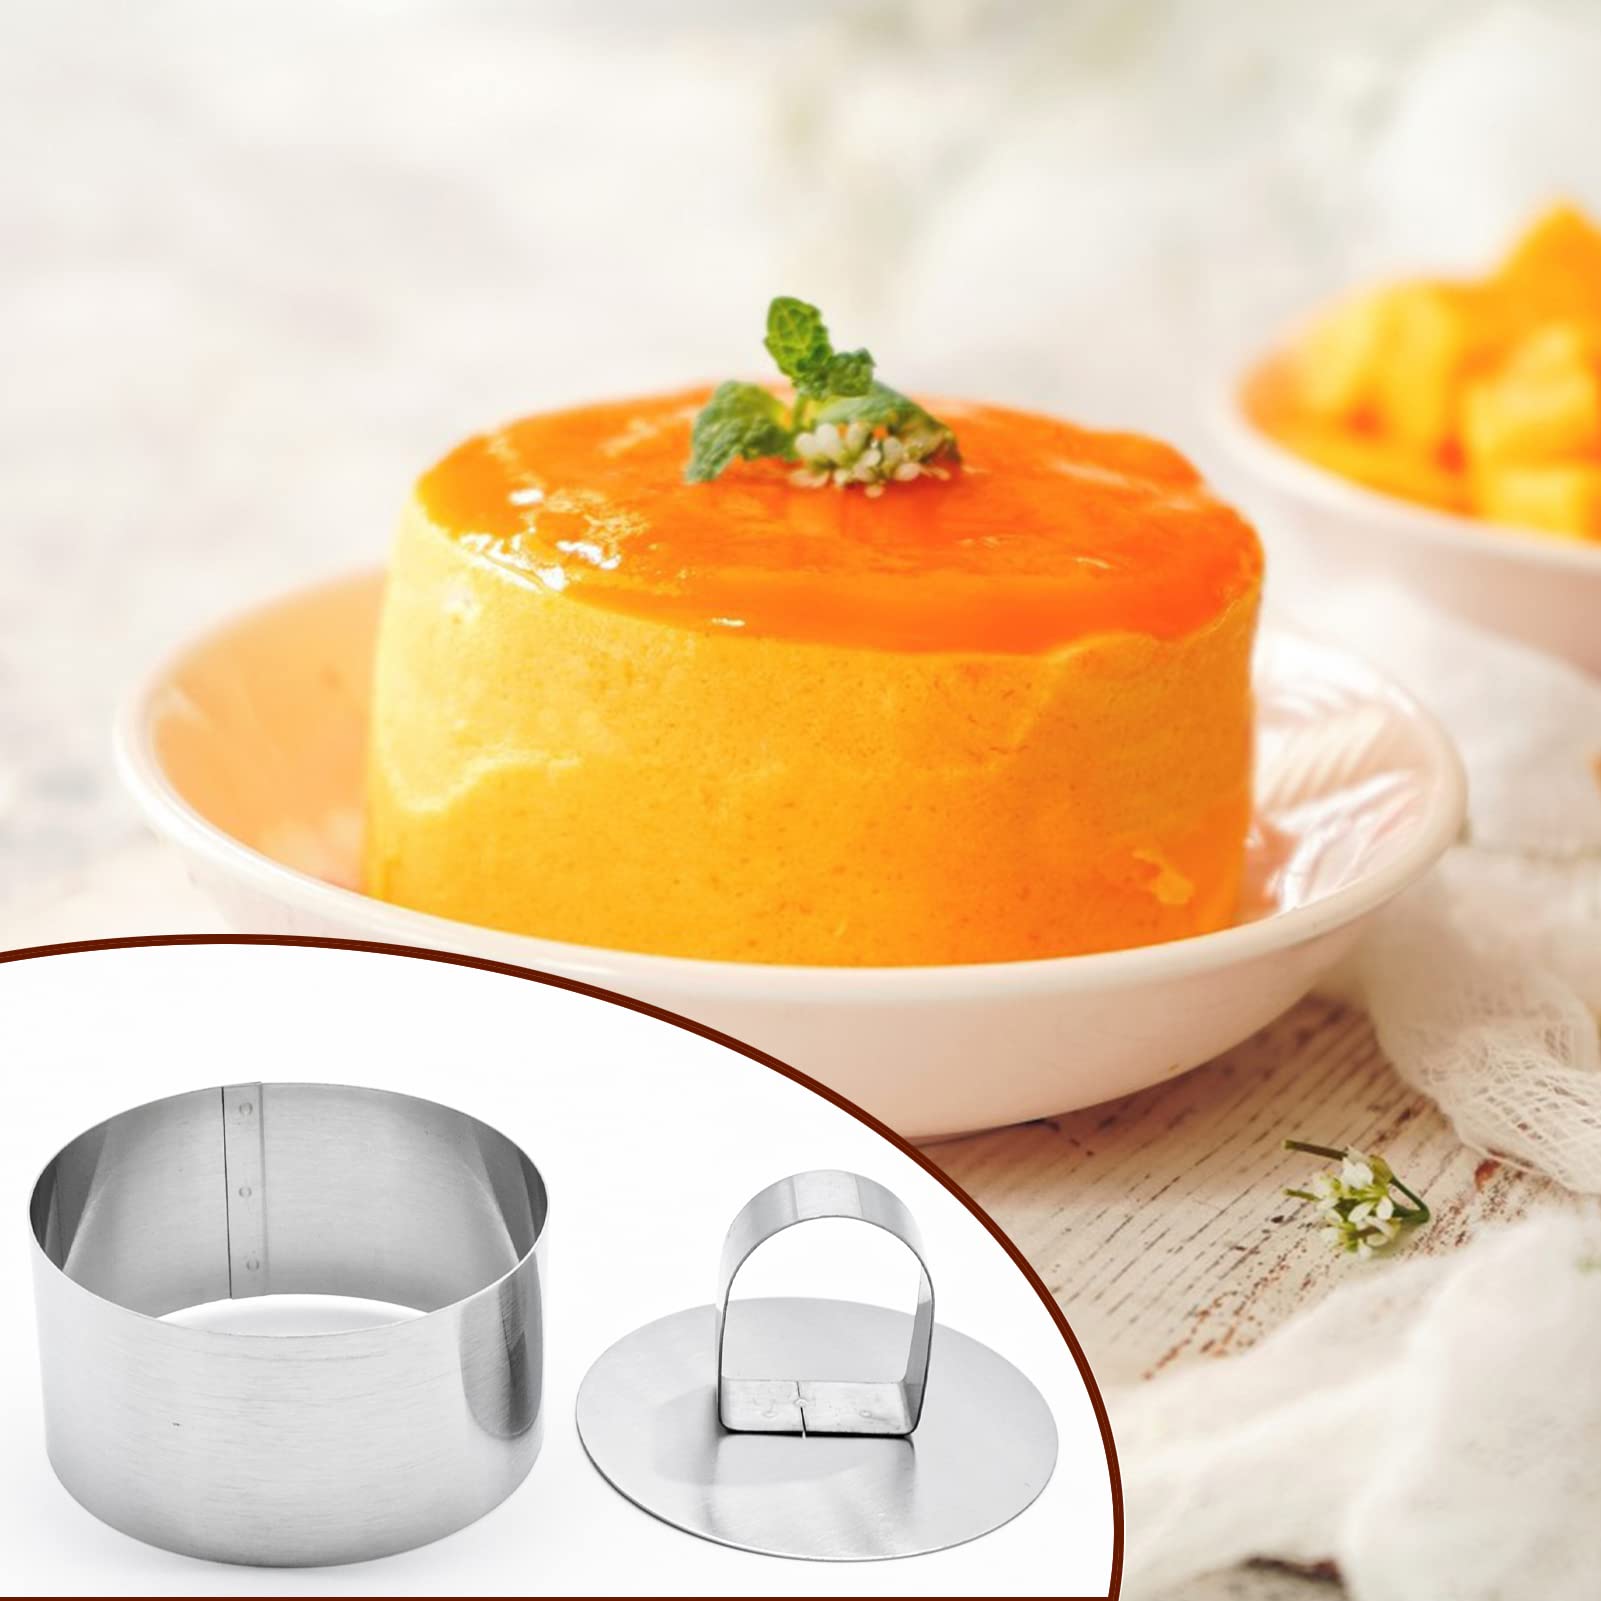 6 Pieces Round Cake Ring Mold, 3 inch Stainless Steel Mousse Mould, Mini Pancake Pastry Dessert Baking Ring Mold